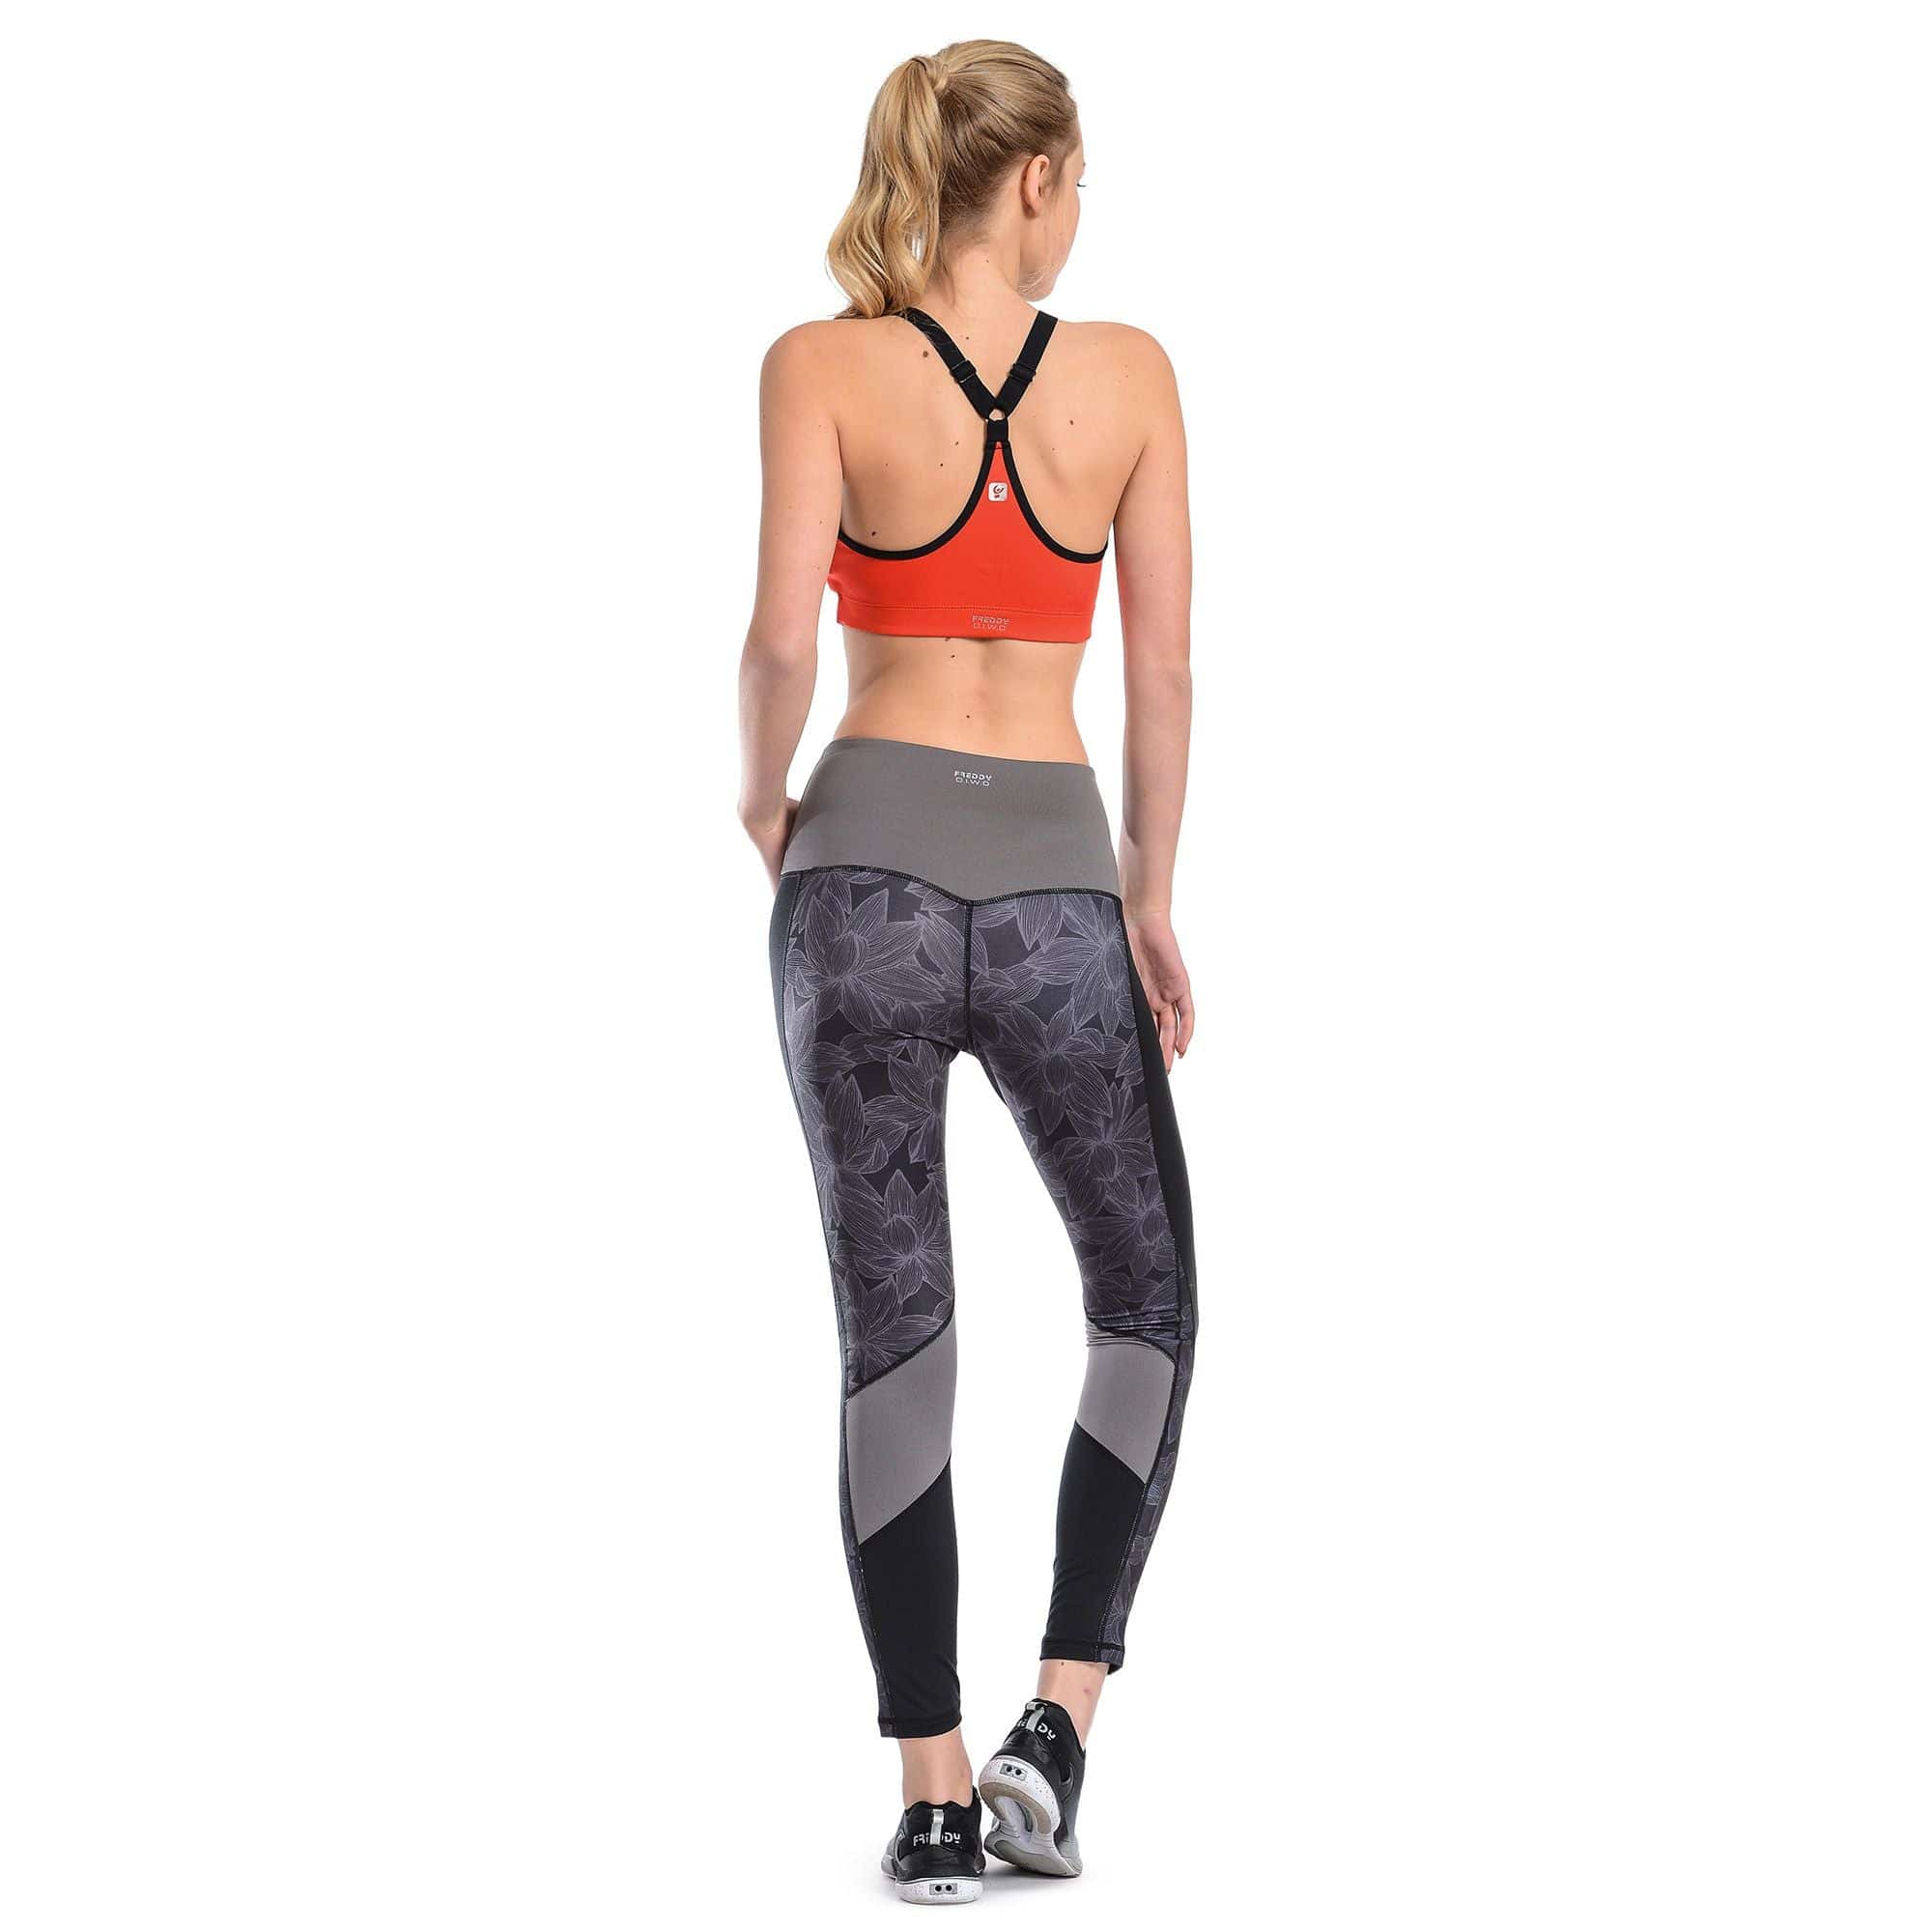 WR.UP® Diwo Activewear - Mid Rise - 7/8 Full - Grey Flower Print 2